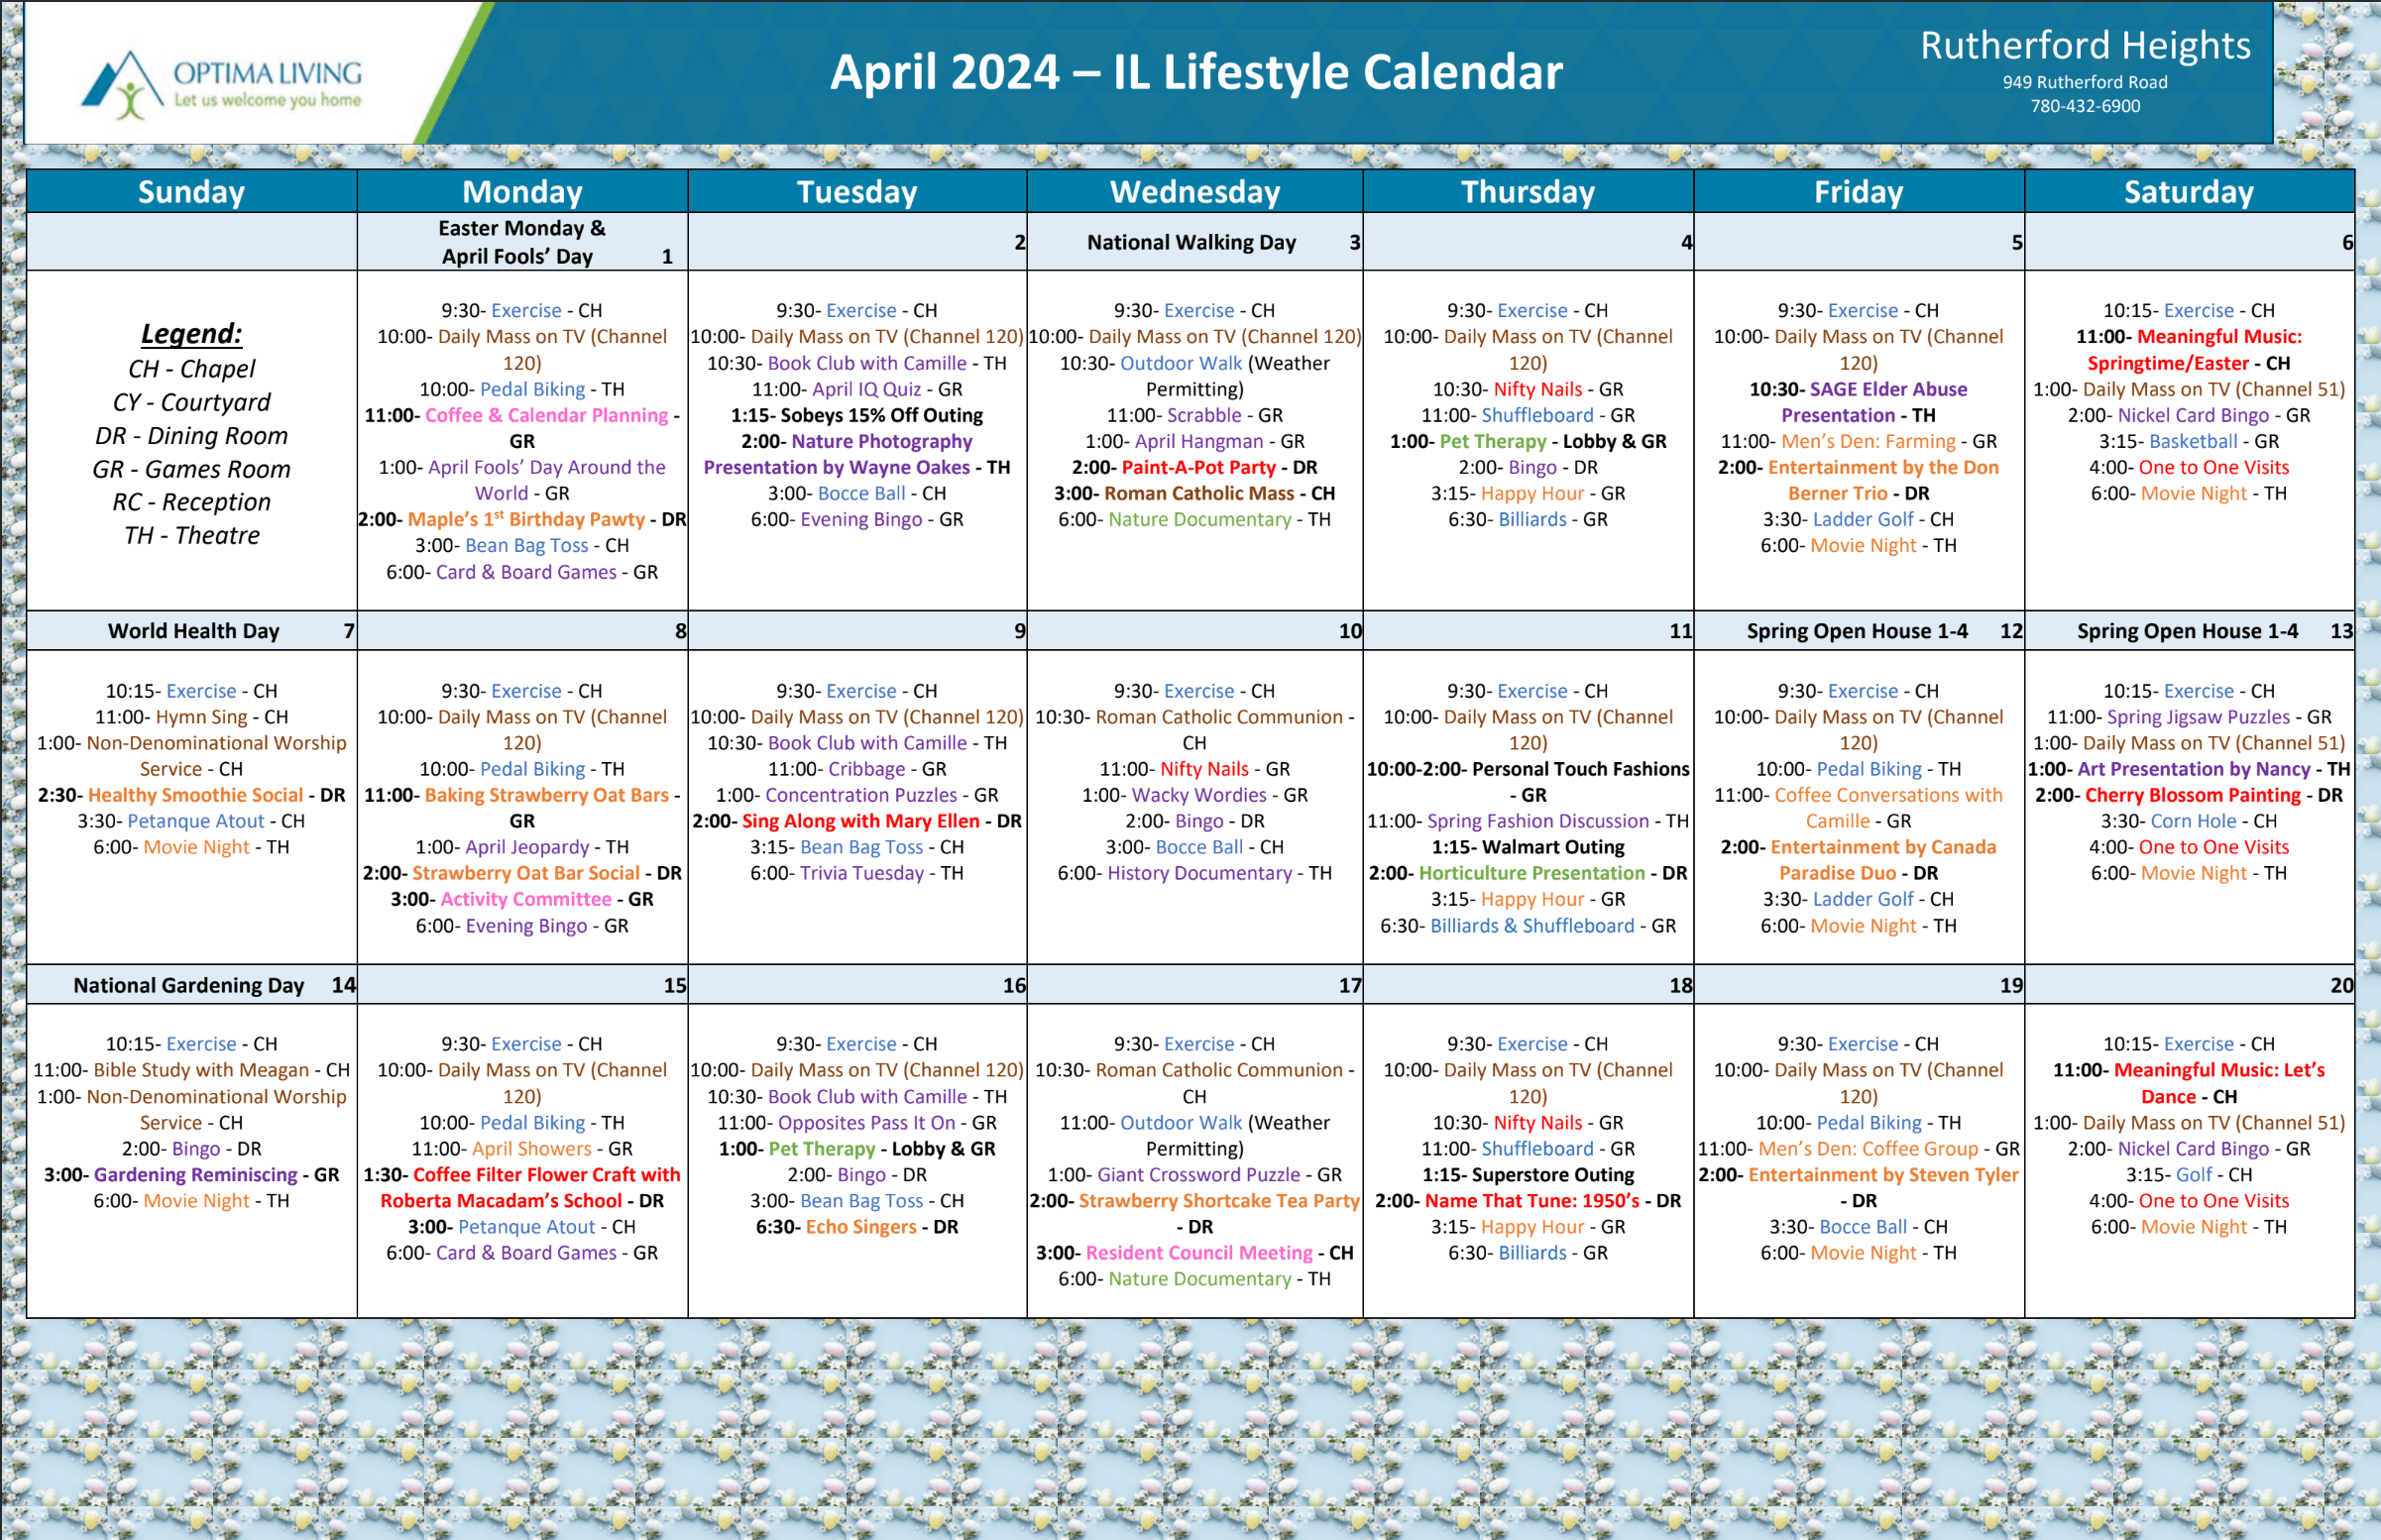 Rutherford Heights April 1-20 2024 IL event calendar